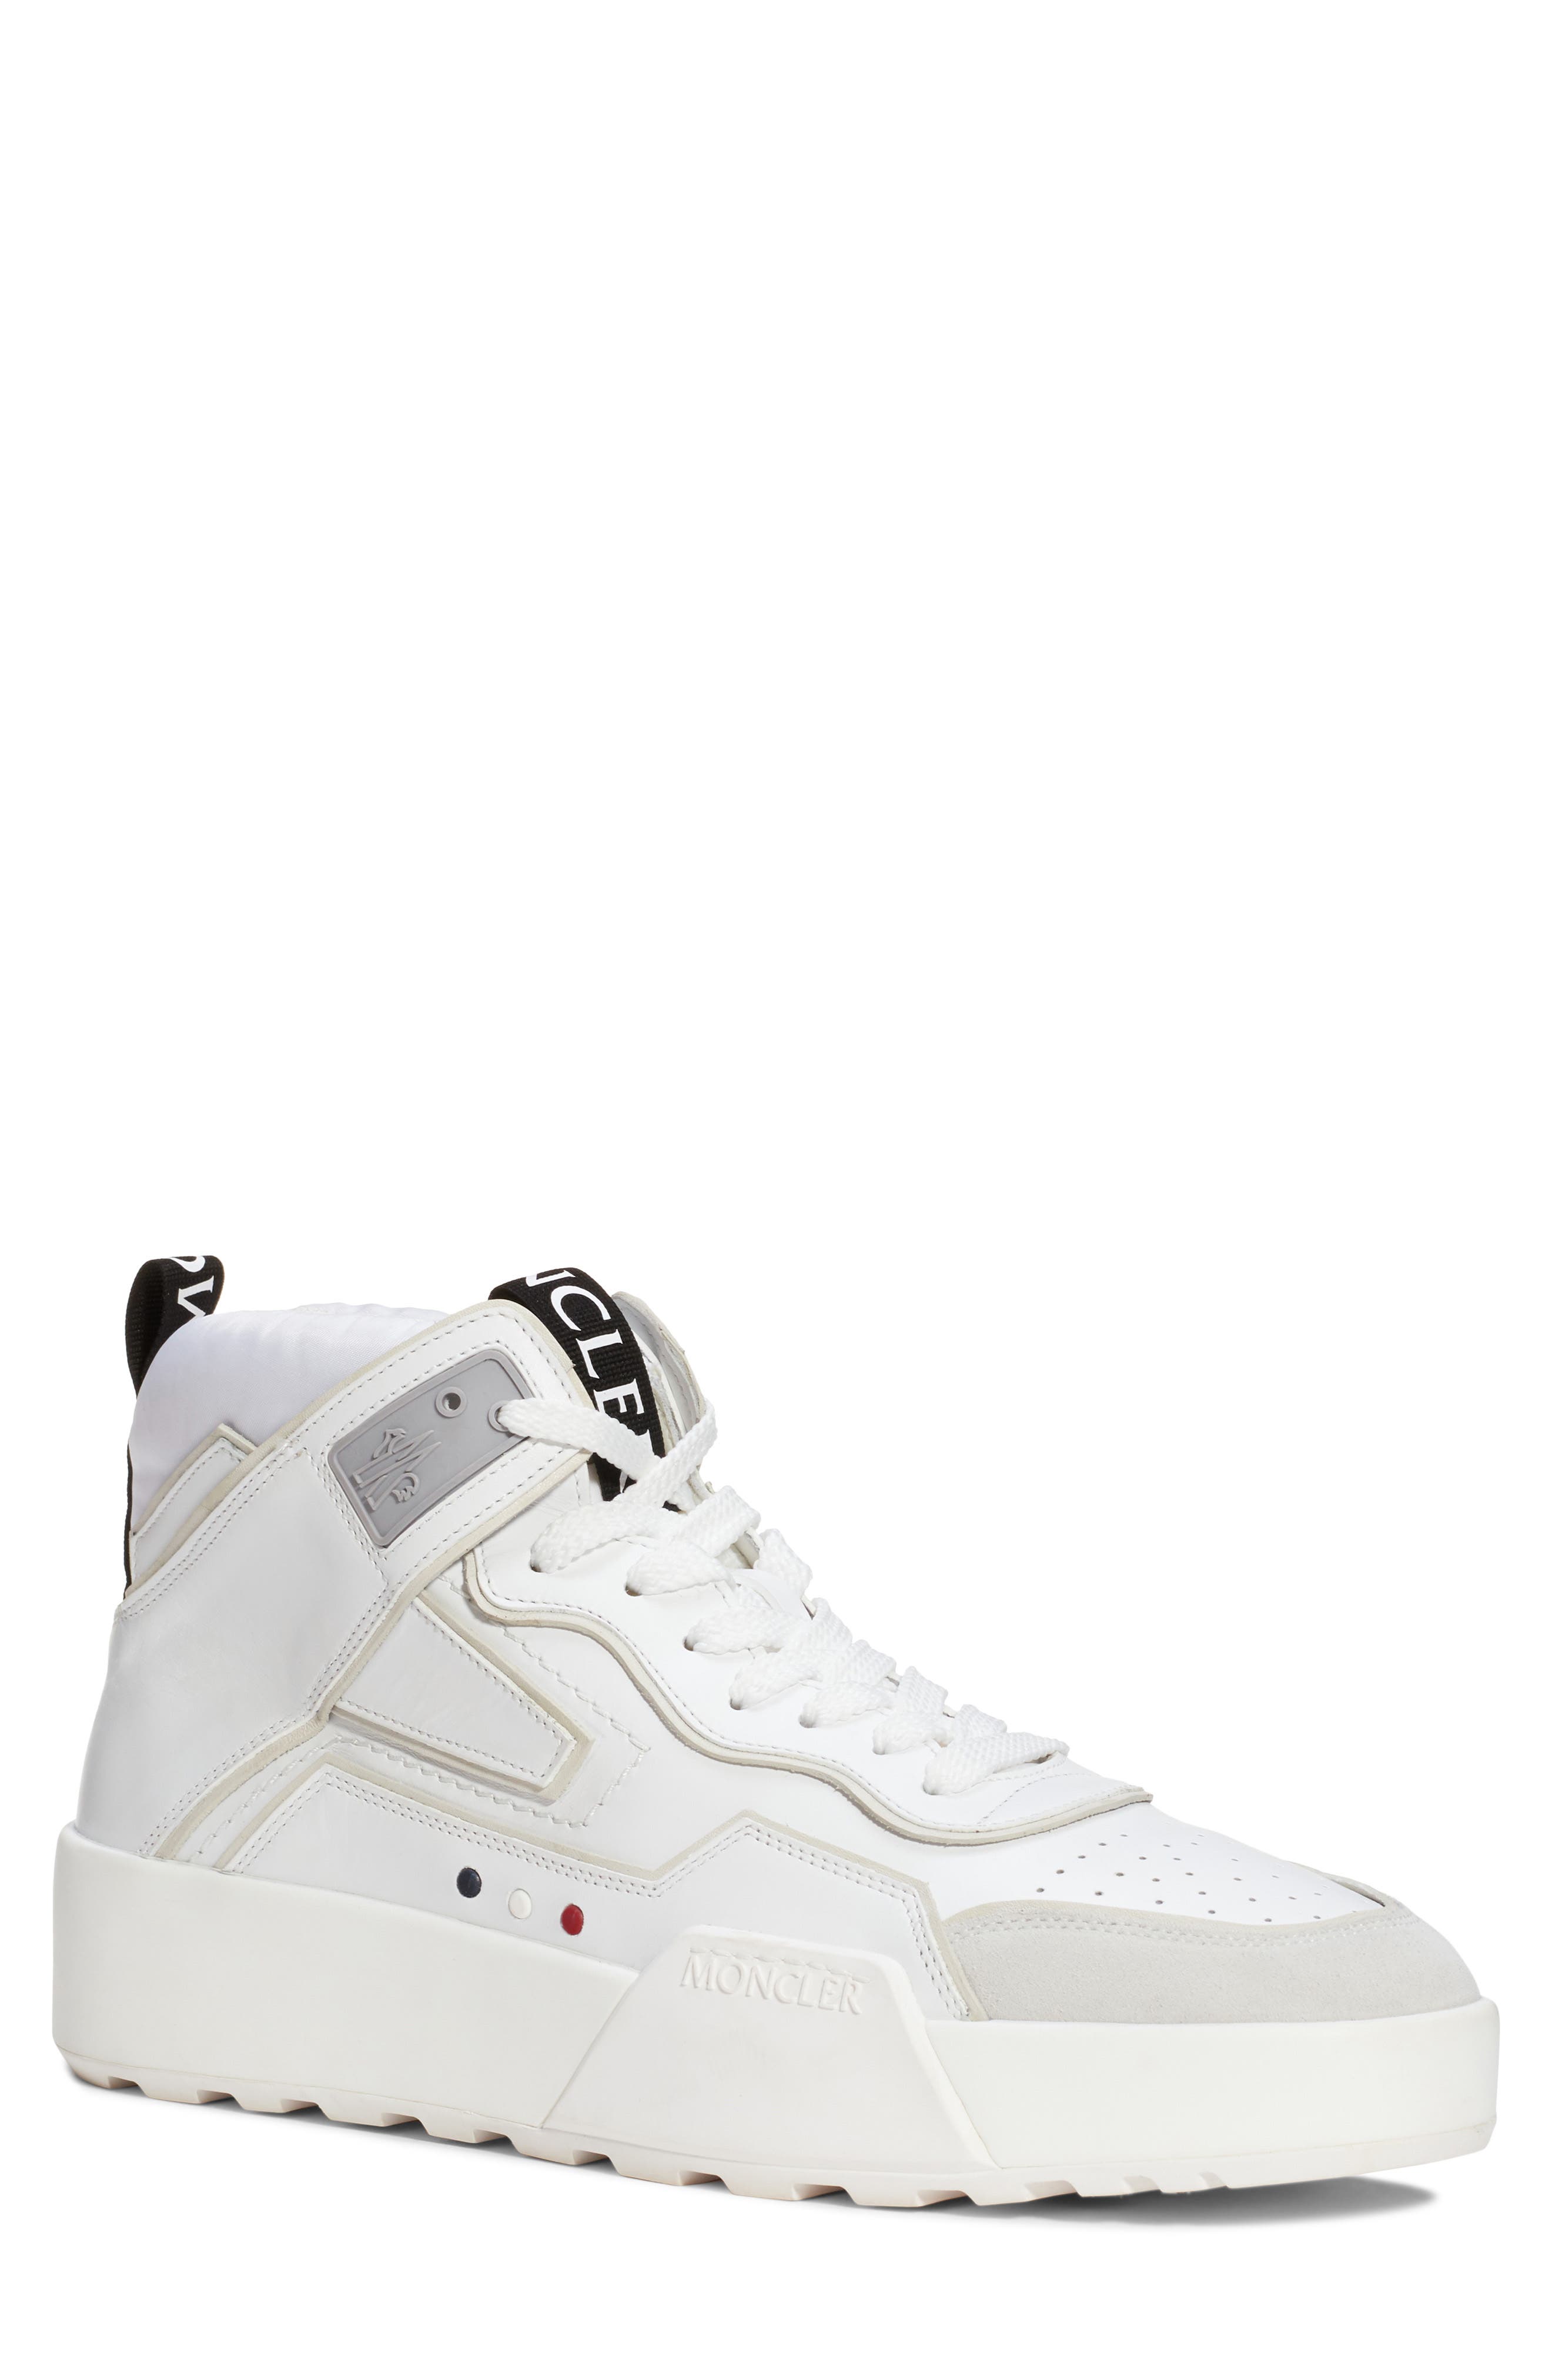 Moncler Promyx High Top Sneaker in White at Nordstrom, Size 11Us